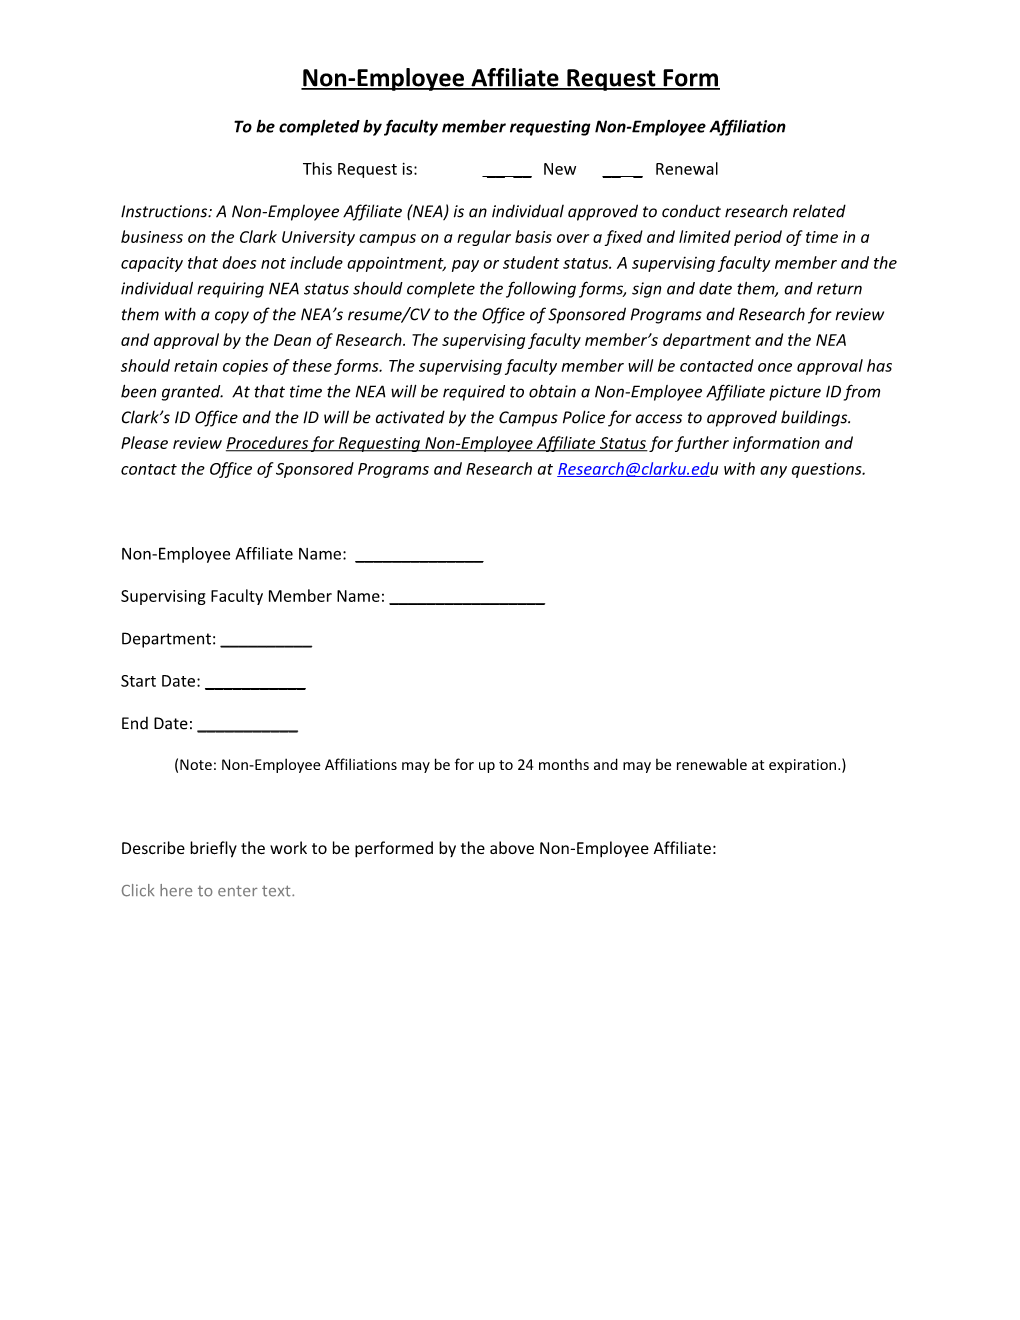 Non-Employee Affiliate Request Form